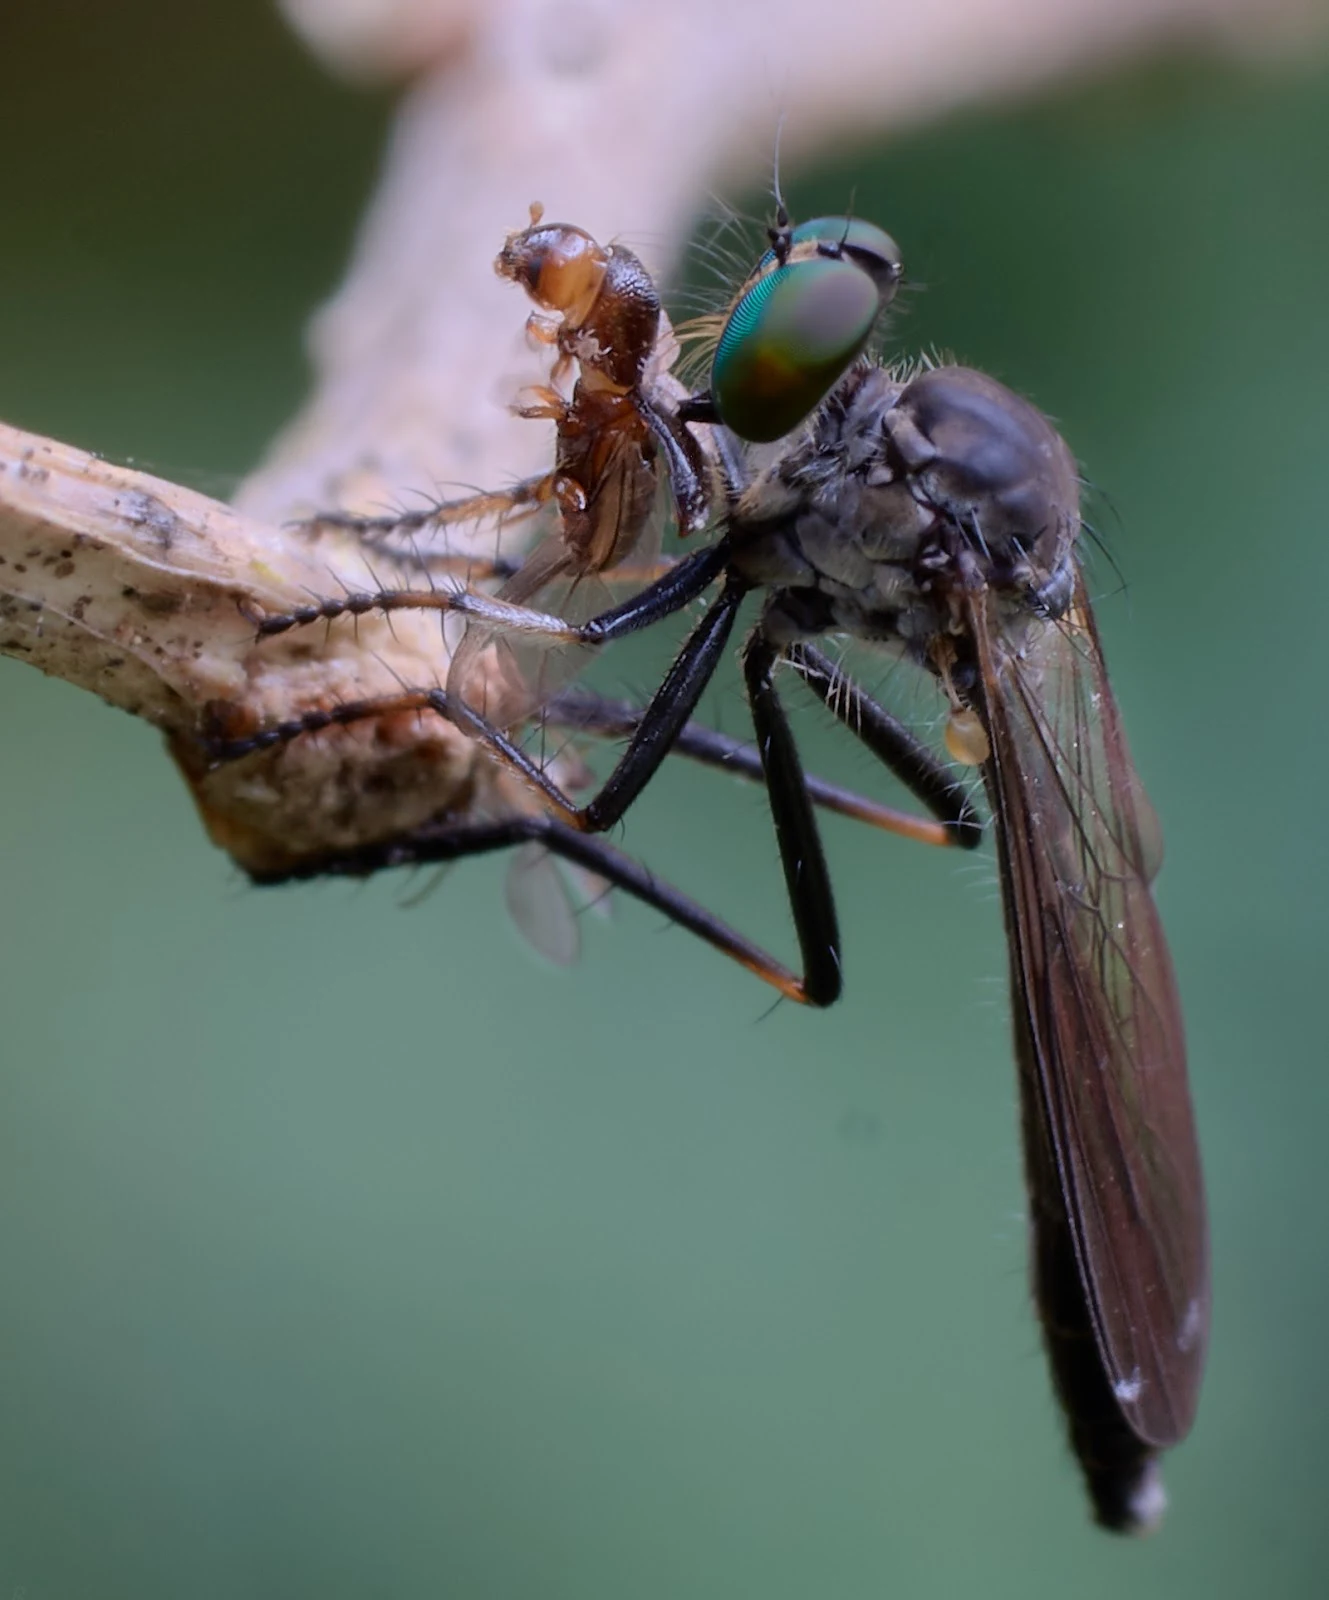 I believe that the Robber Fly is eating a beetle of some sort.